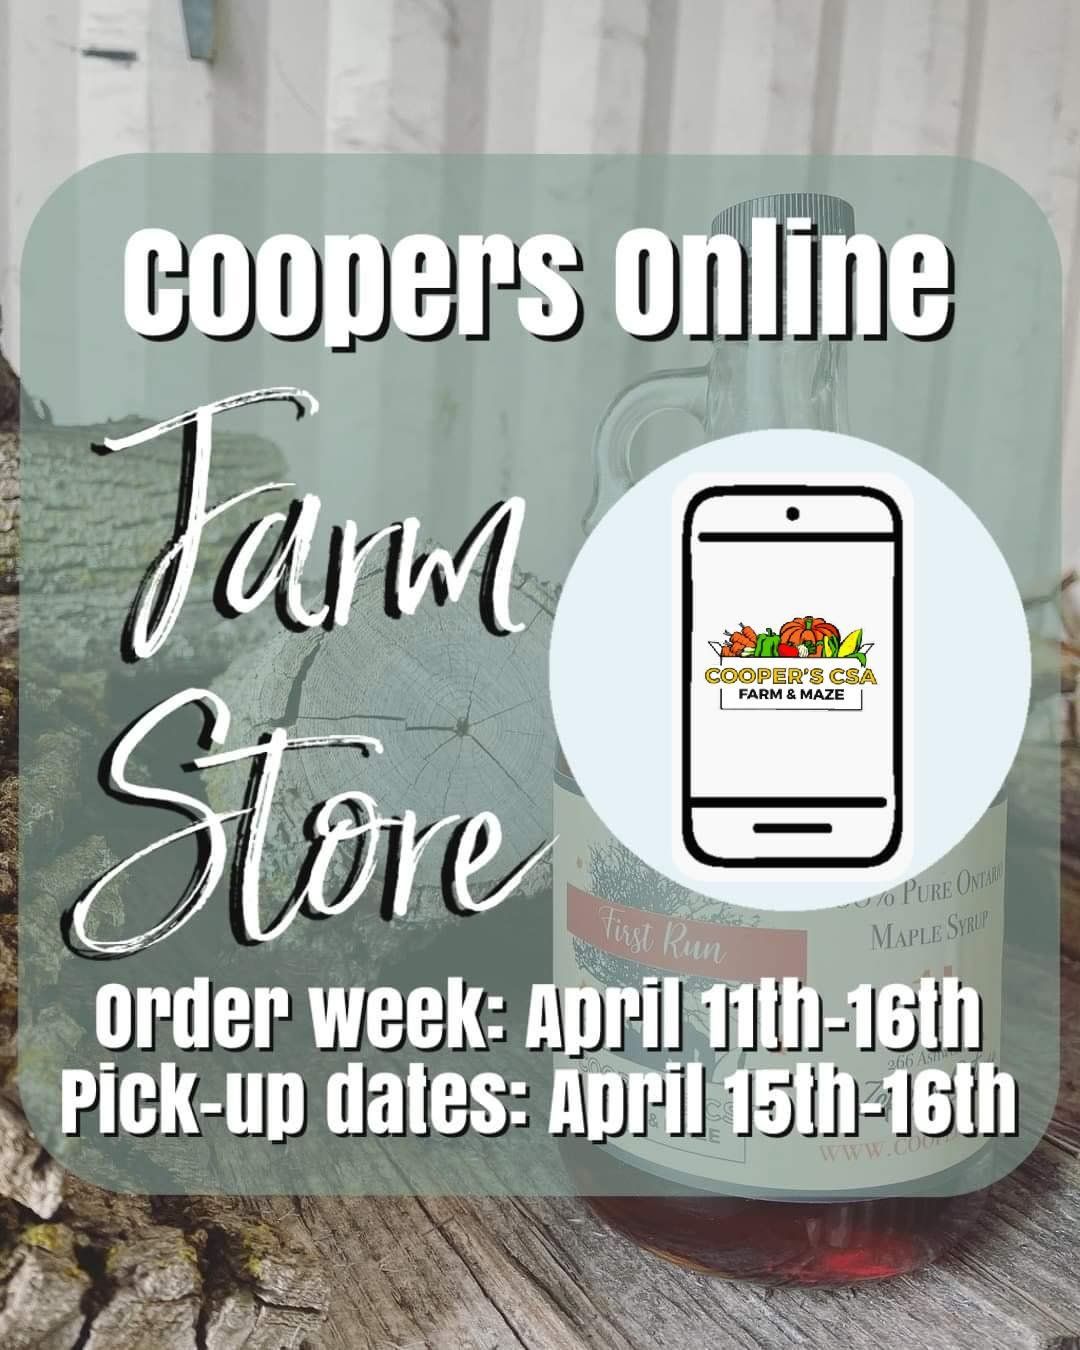 Previous Happening: Coopers Online Farm Stand- Order week April 11th-16th